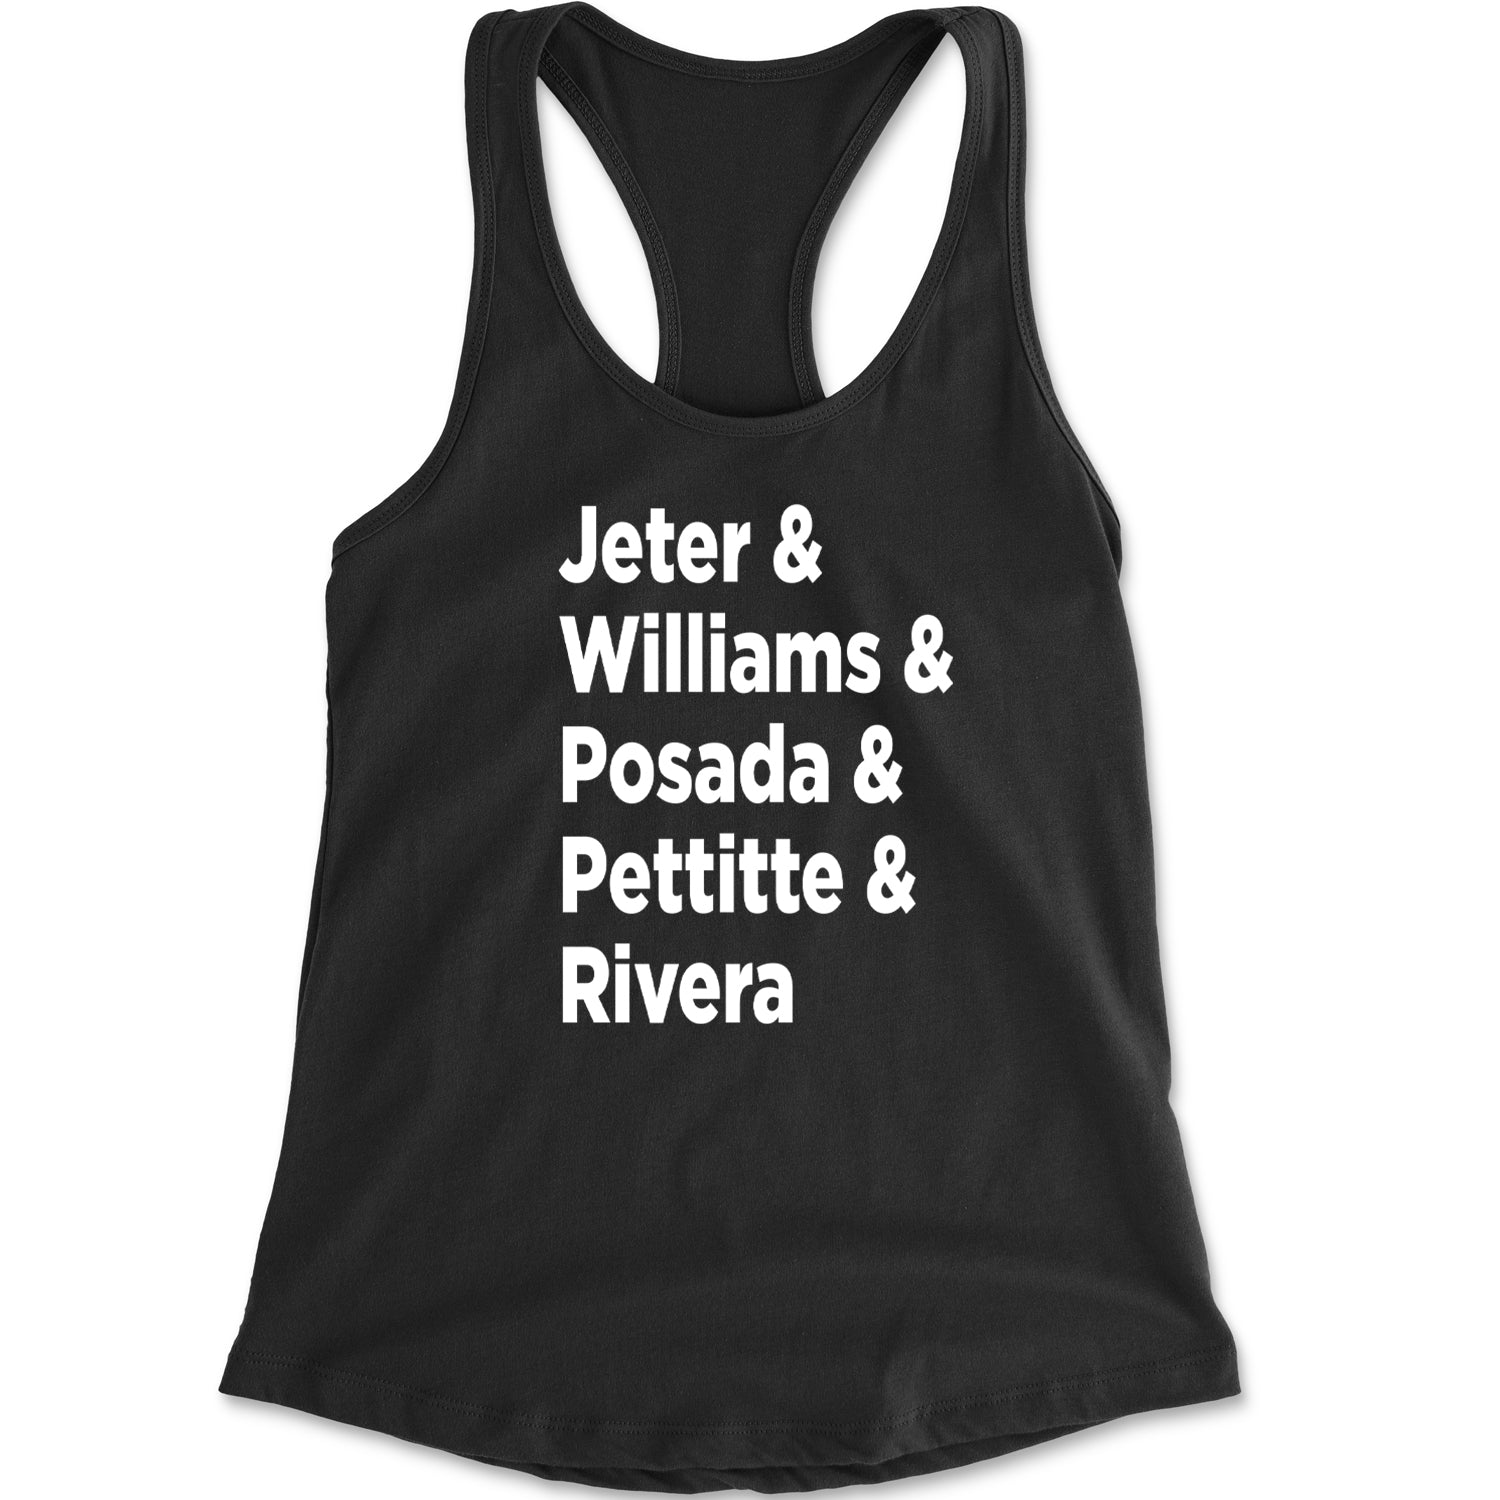 Jeter and Williams and Posada and Pettitte and Rivera Racerback Tank Top for Women baseball, comes, here, judge, the by Expression Tees